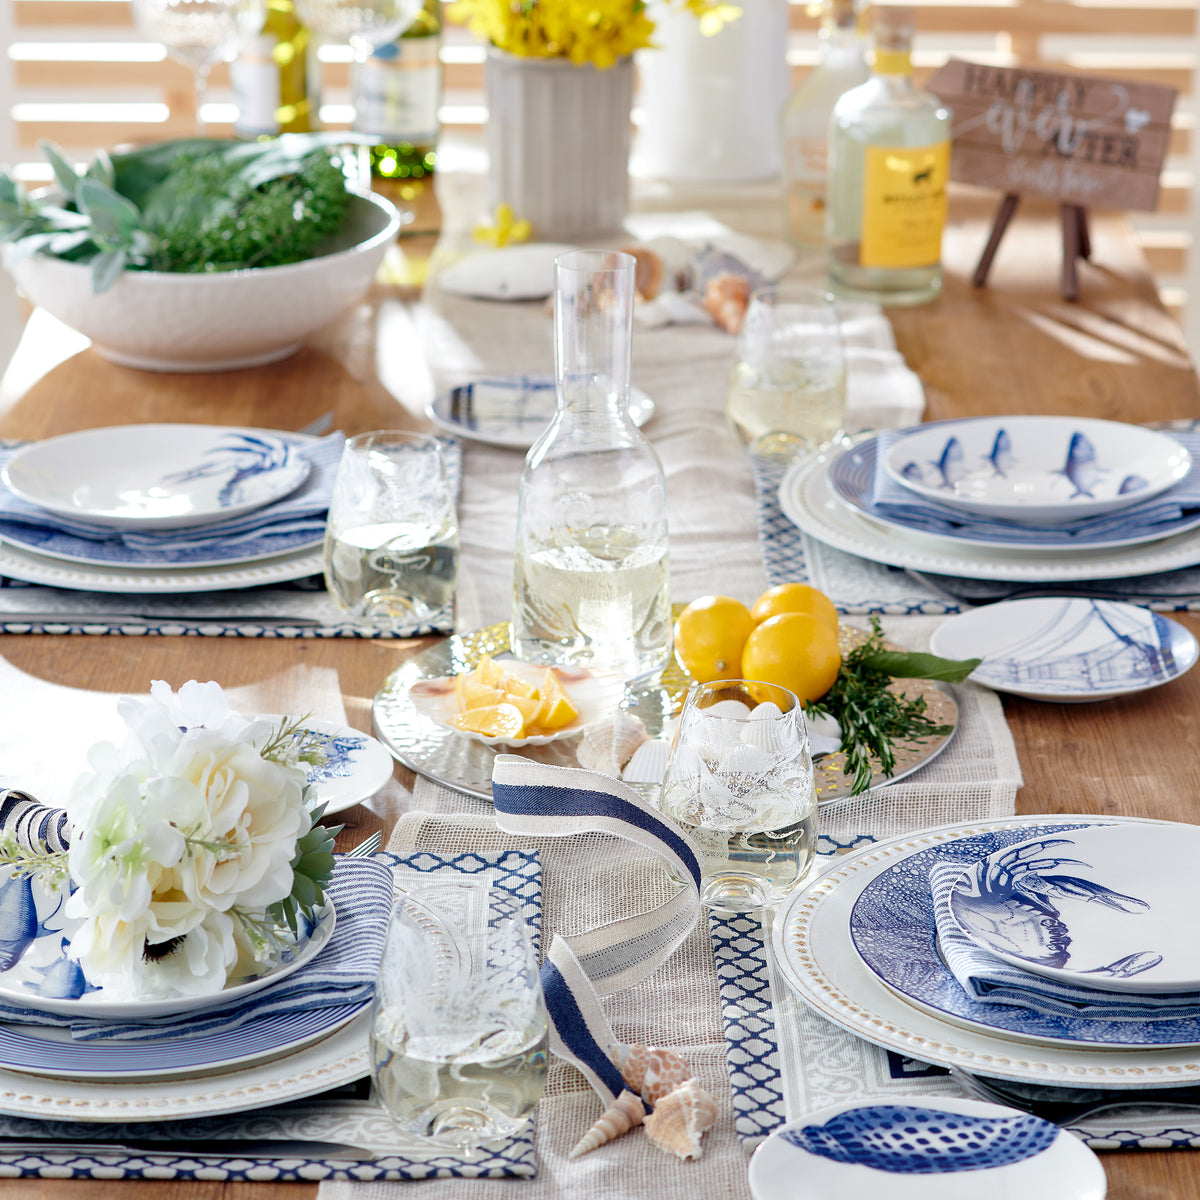 A dining table set with heirloom-quality dinnerware featuring a crab pattern, blue and white dishware, lemons, Caskata Artisanal Home Crab Small Plates, a carafe of water, decorative flowers, and various condiments. There is a centerpiece and a background with bottles and flowers.